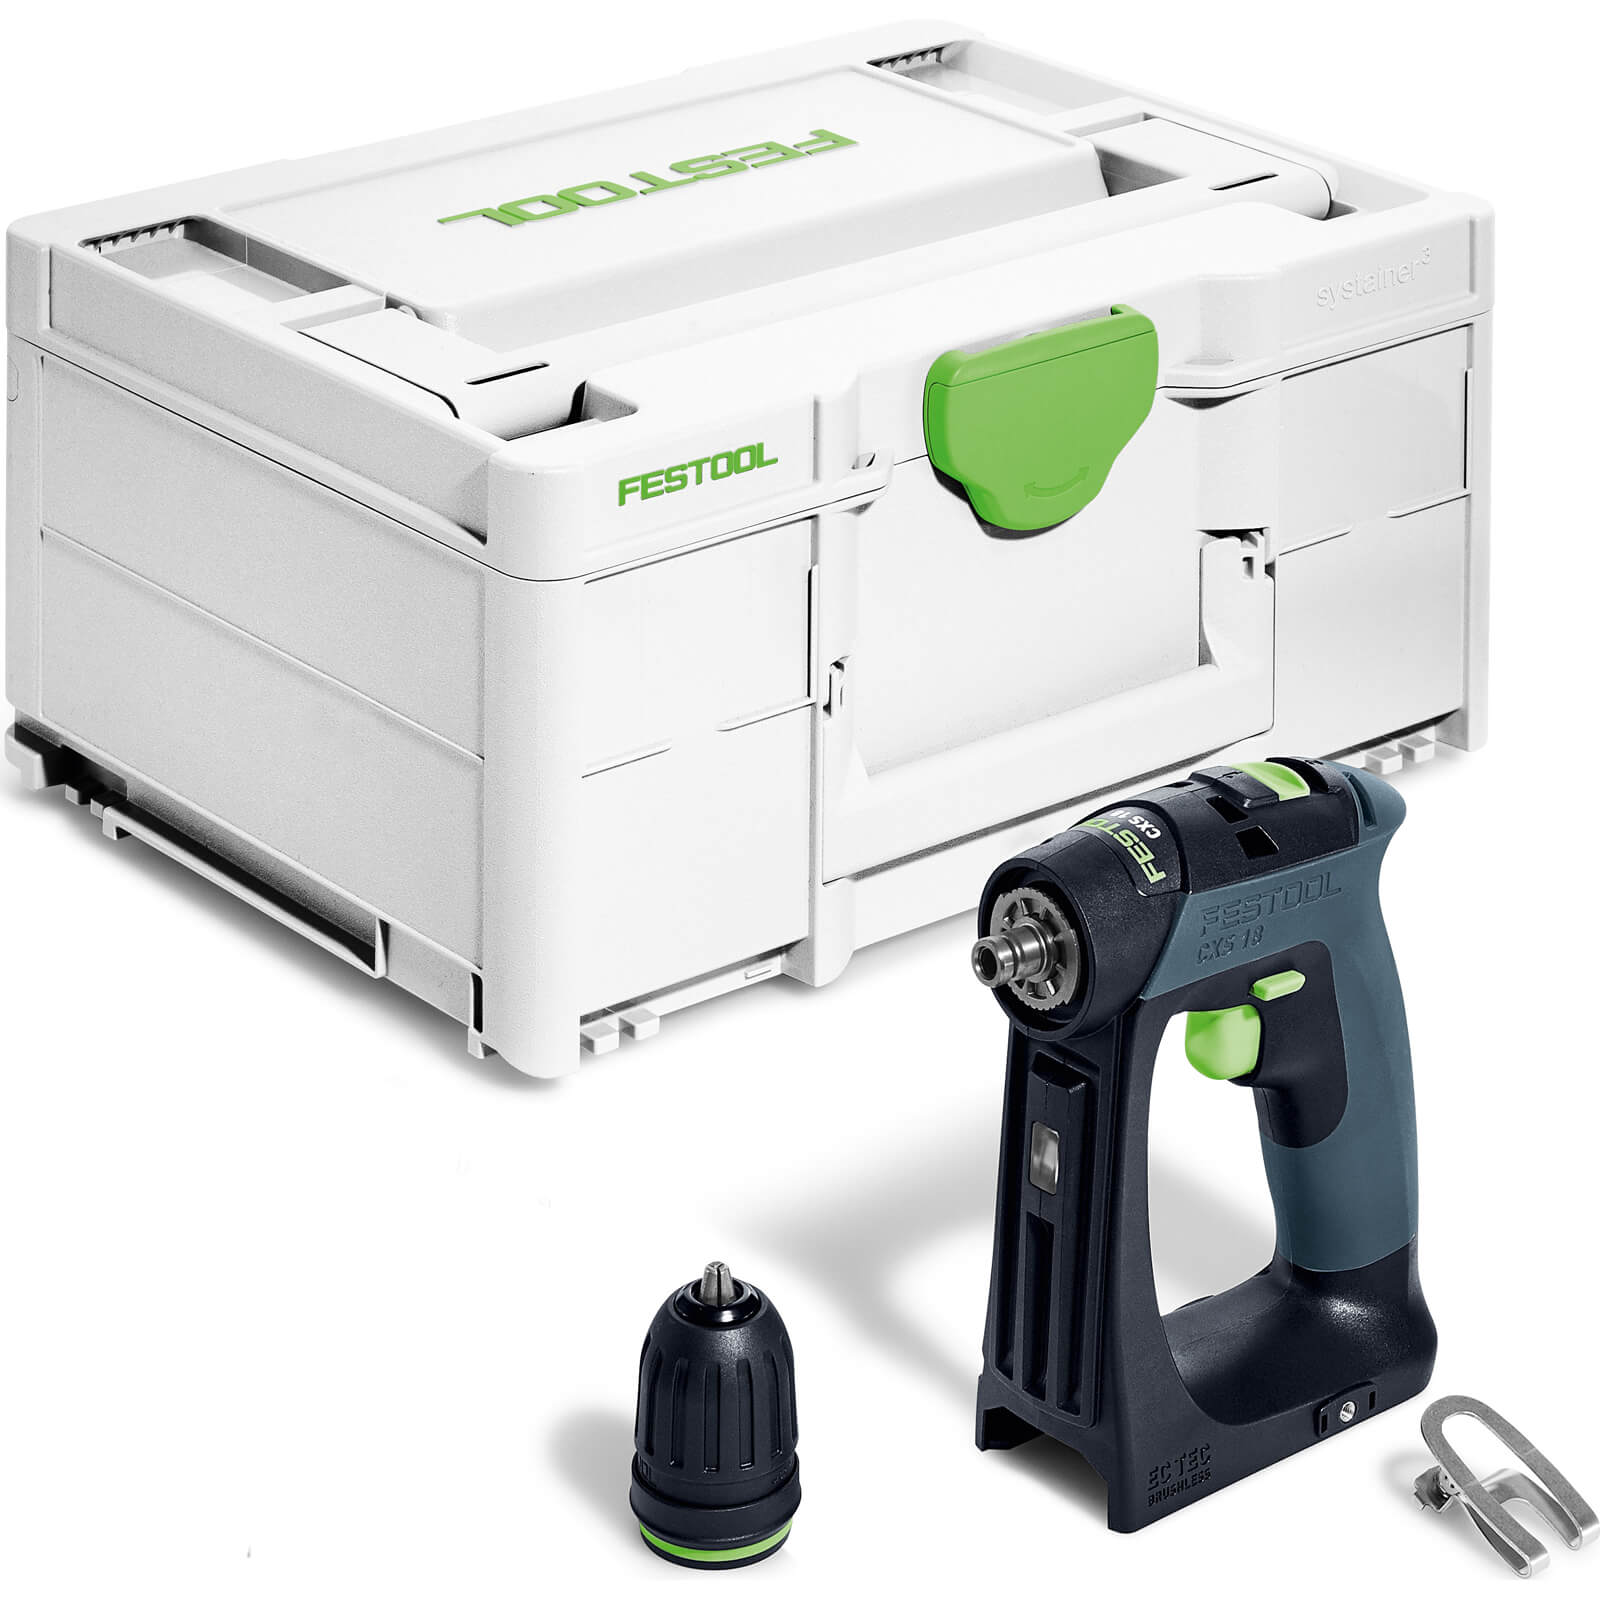 Festool CXS 18 18v Cordless Brushless Drill Driver No Batteries No Charger Case